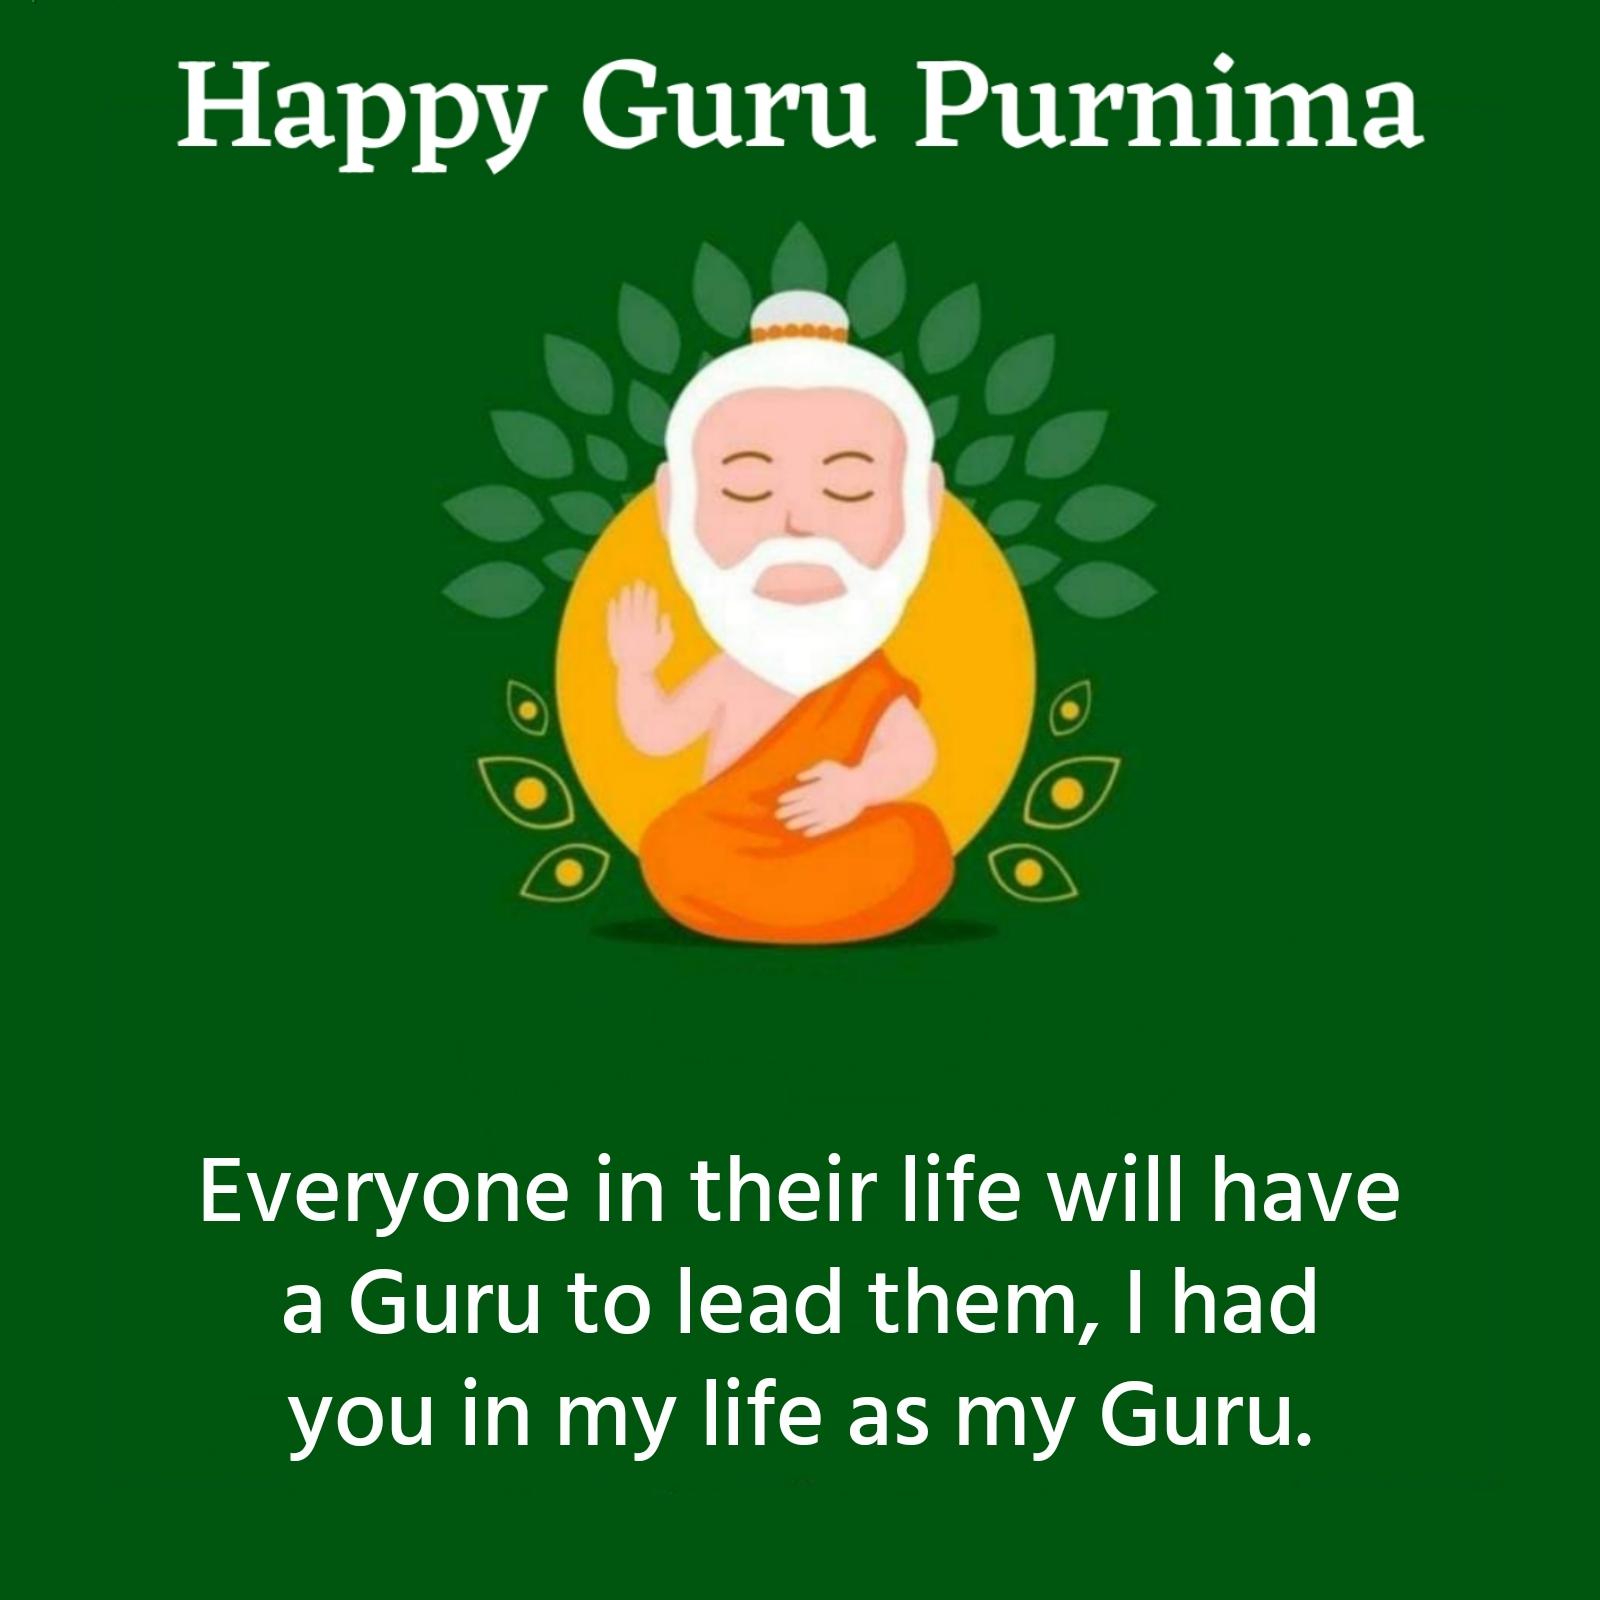 Everyone in their life will have a Guru to lead them